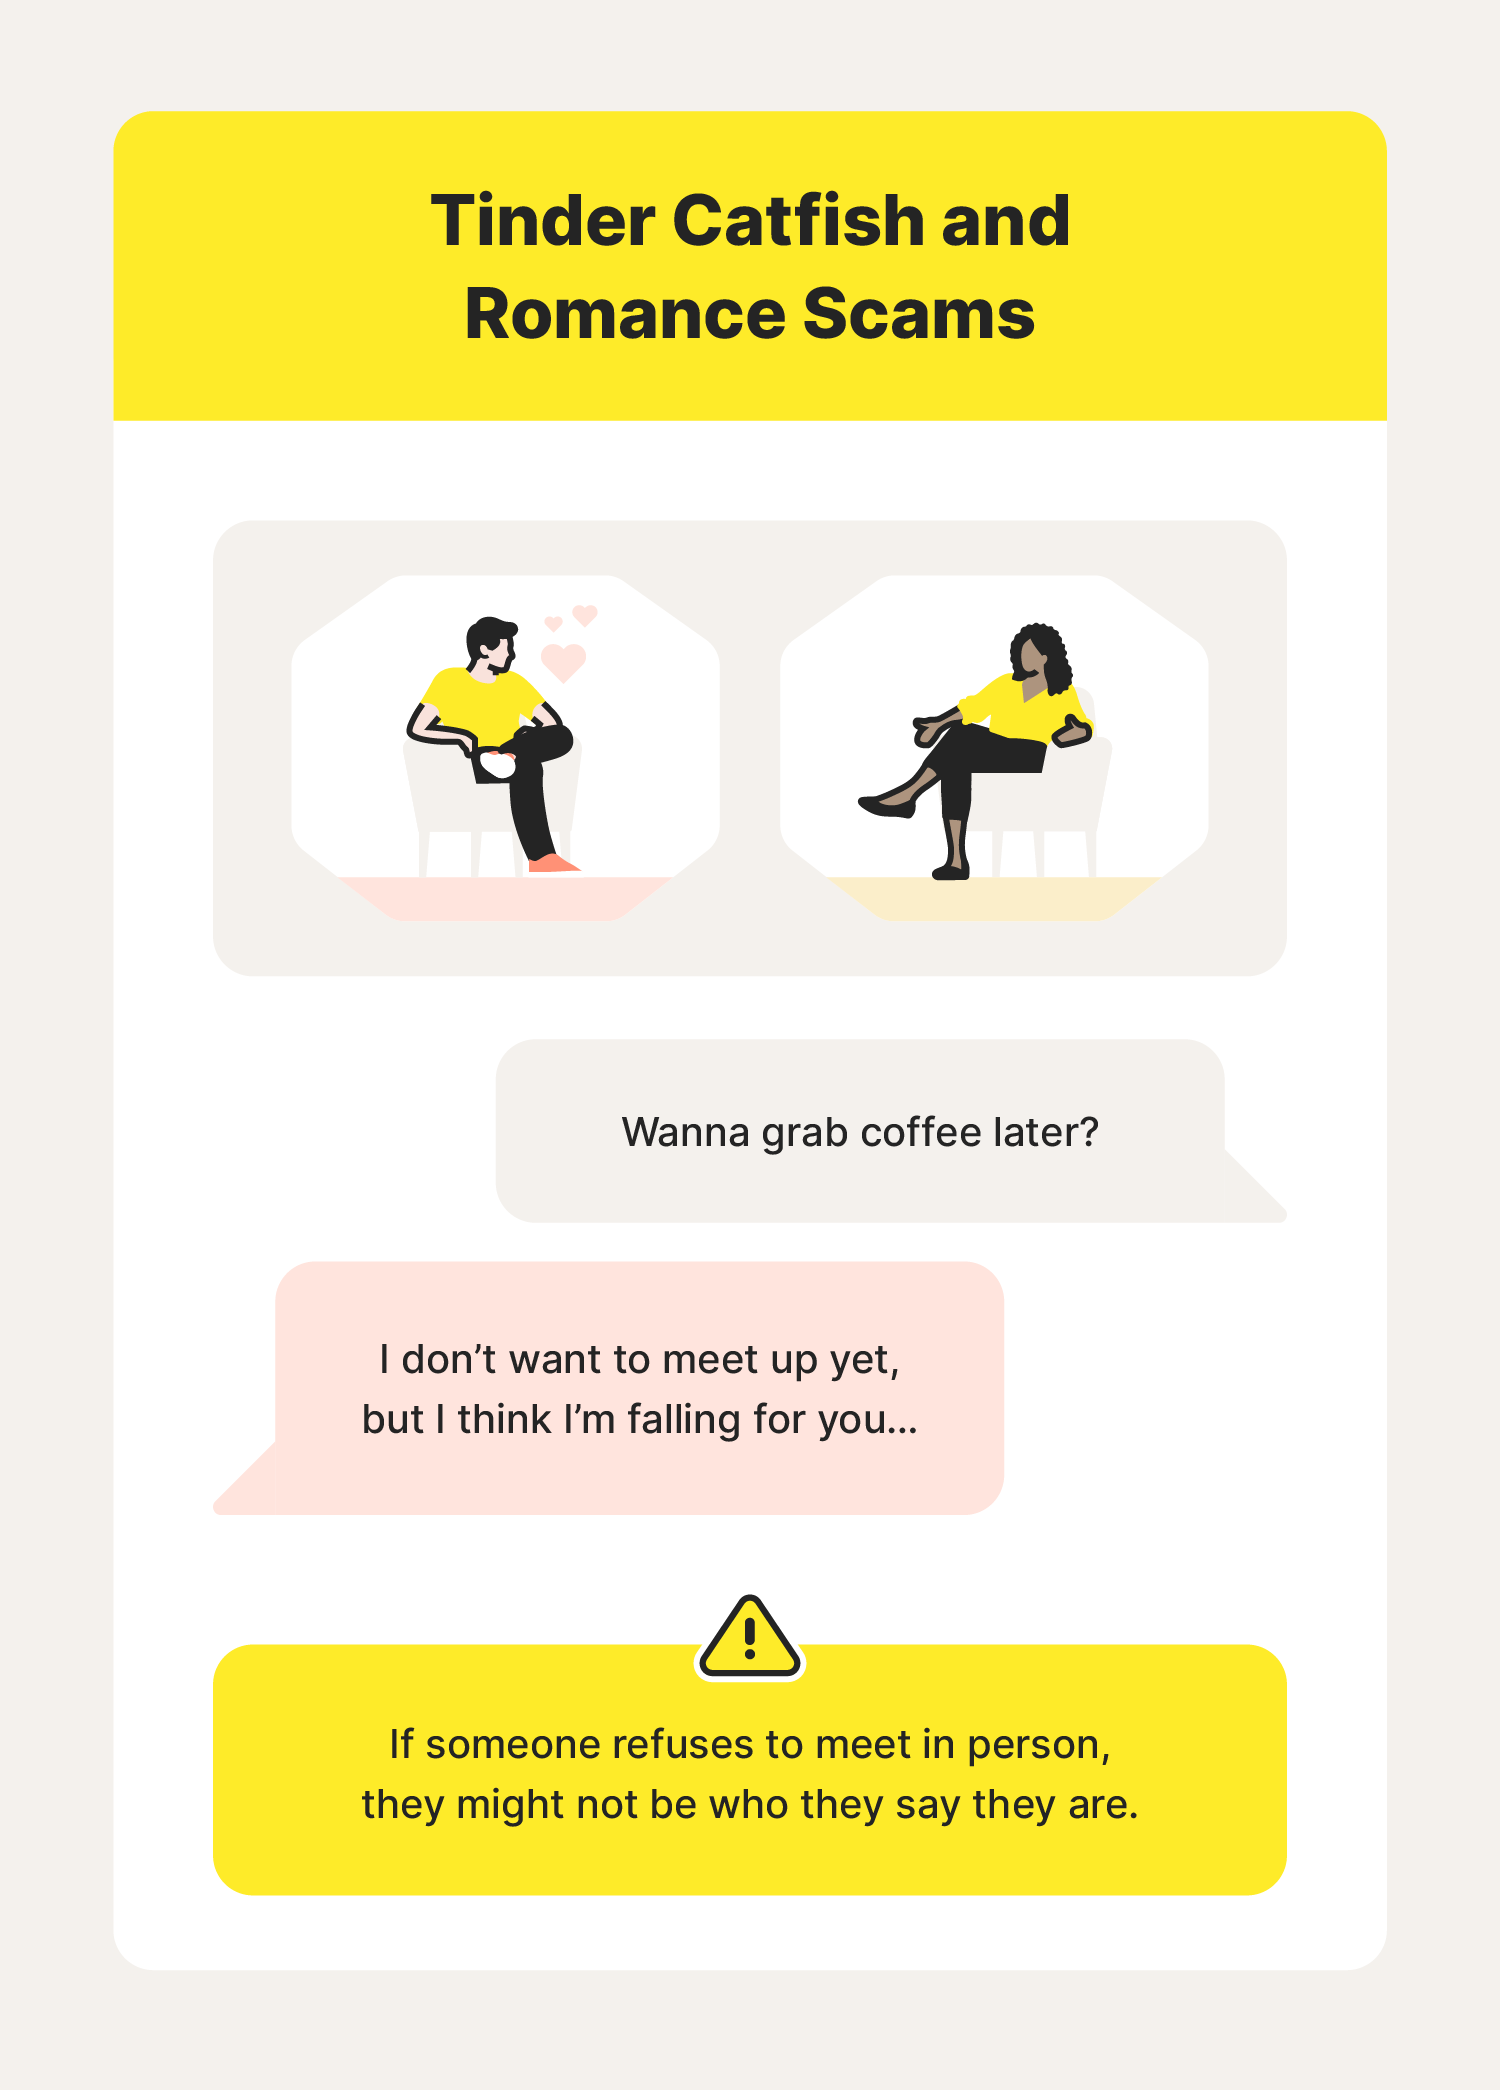 To avoid Tinder catfish and romance scams, be wary if someone refuses to meet in person.